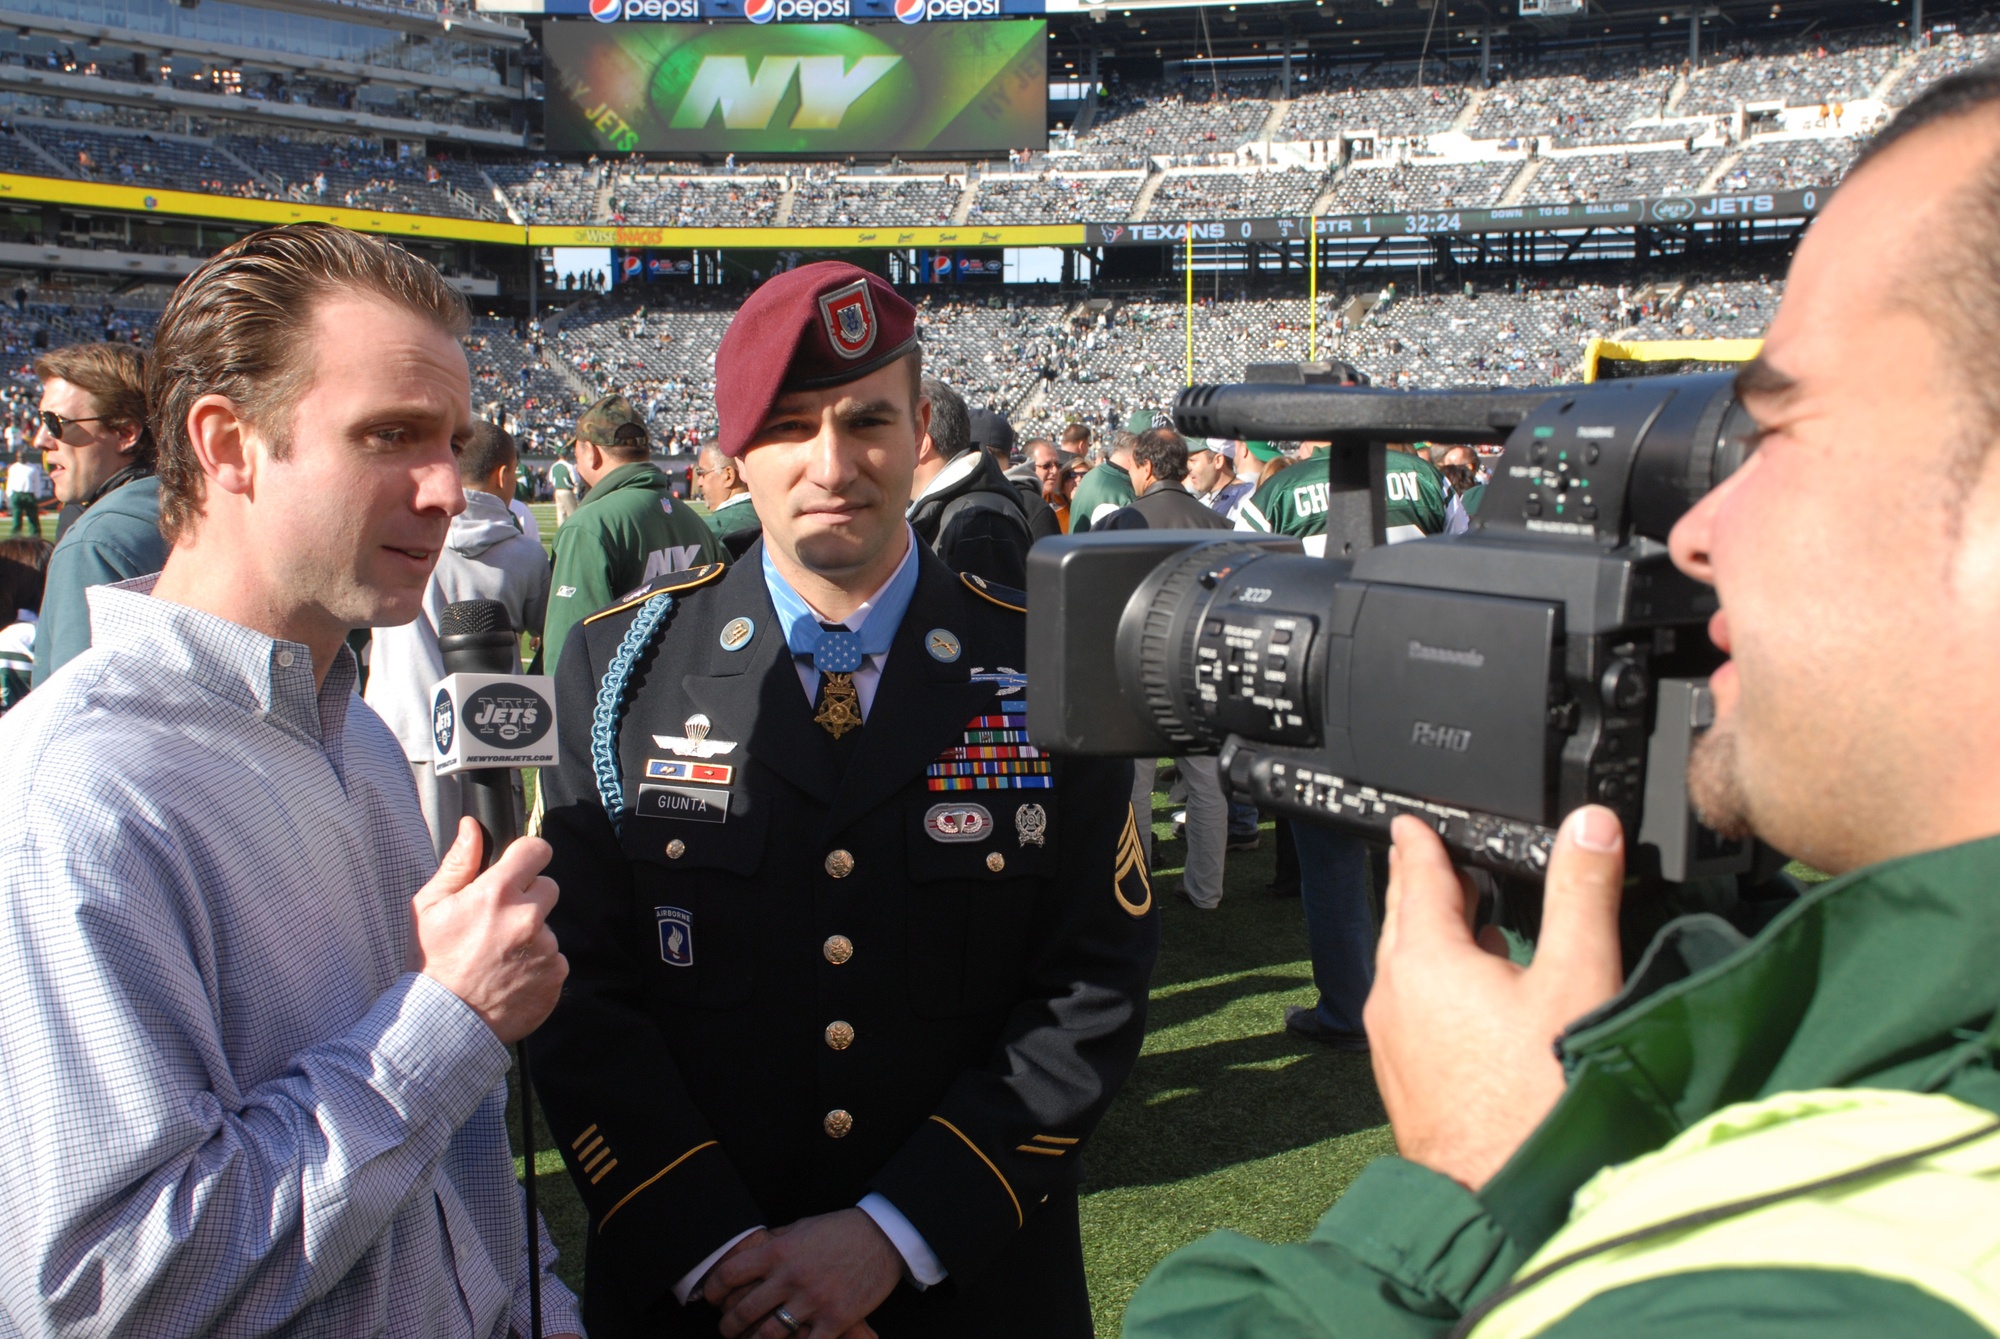 DVIDS - Images - NY Jets Military Appreciation Game [Image 5 of 5]